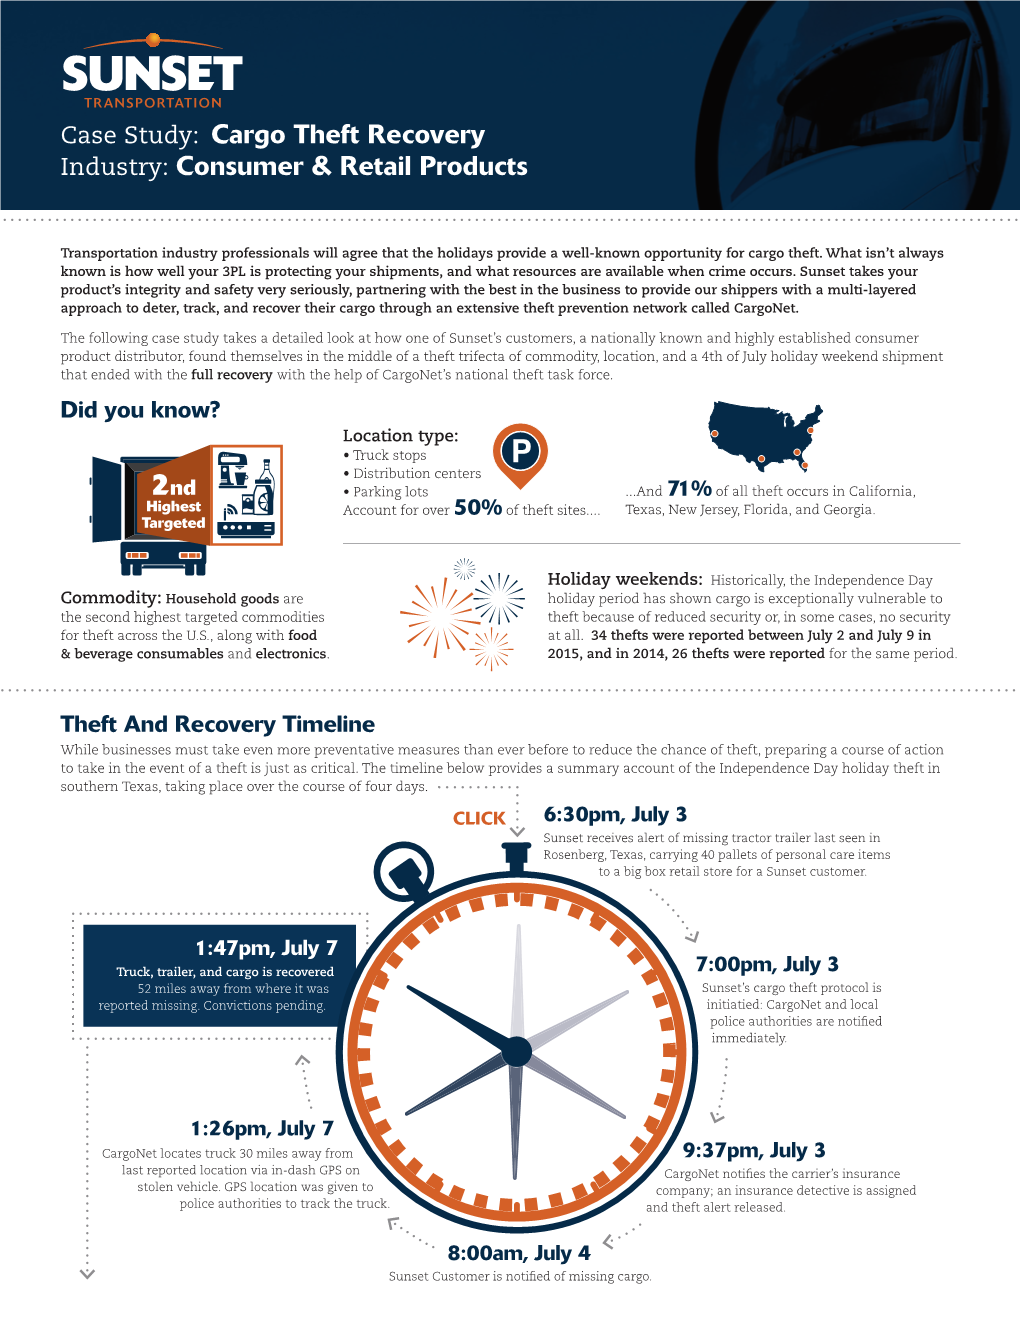 Case Study: Cargo Theft Recovery Industry: Consumer & Retail Products